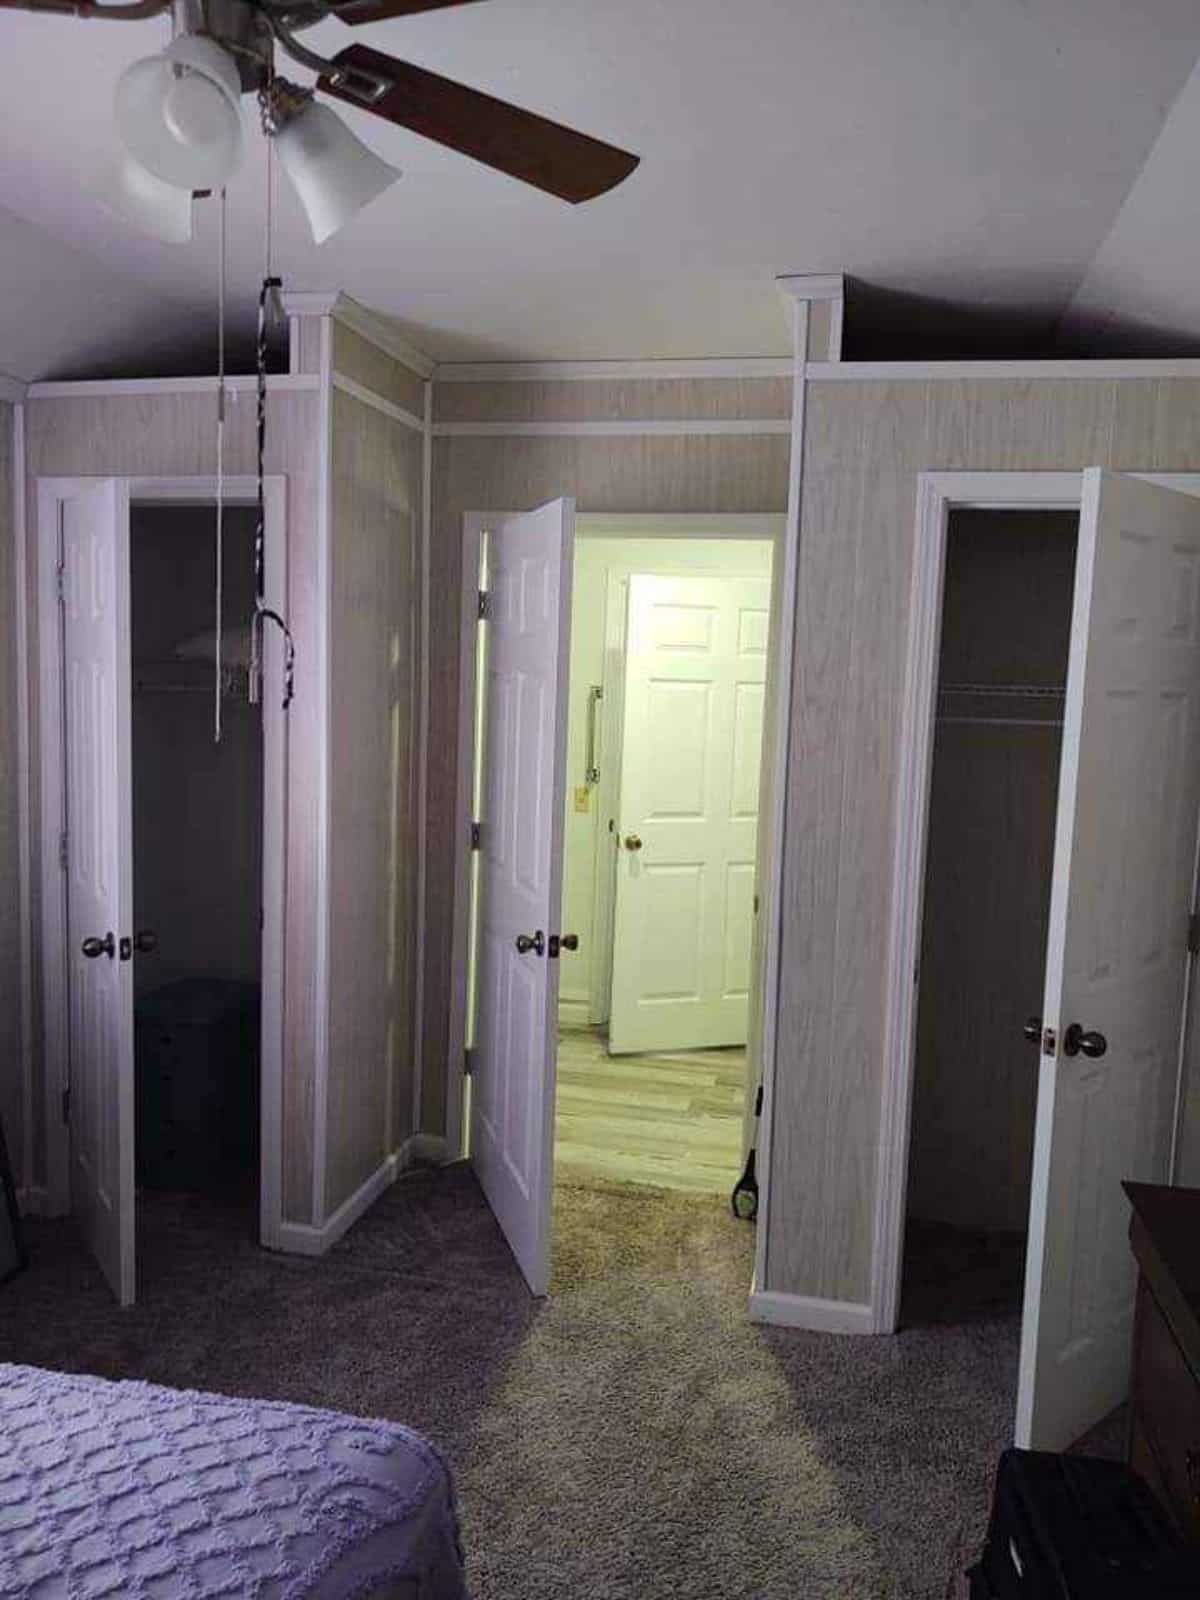 Bedroom of 40’ Tiny House also has a closet, dressing table  and storage